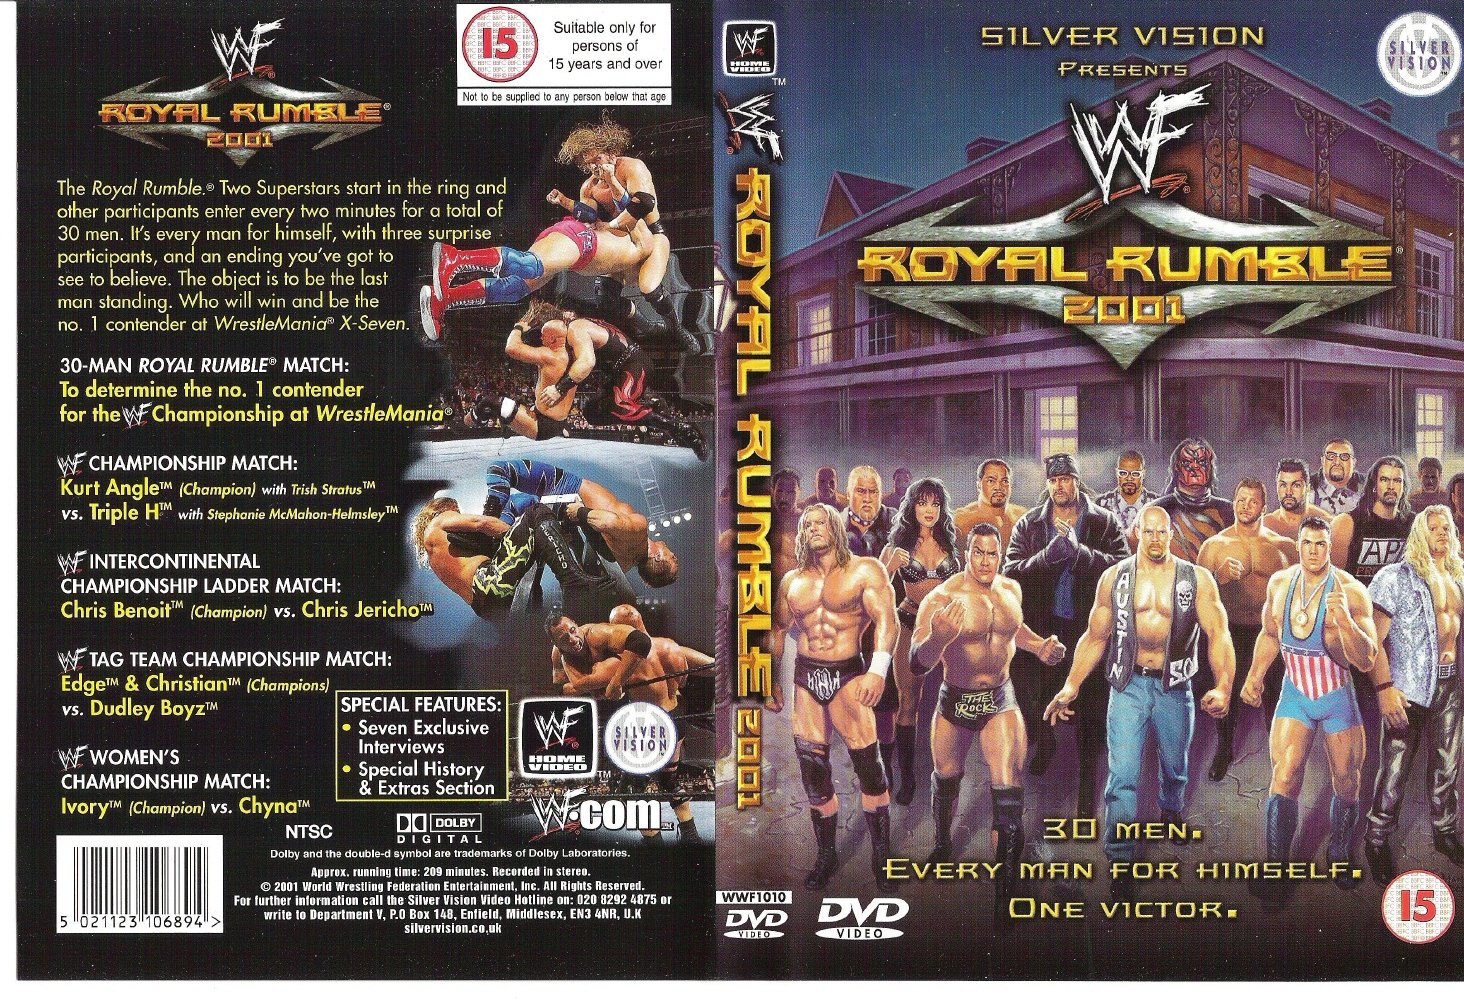 Jaquette DVD WWE Royal Rumble 2001